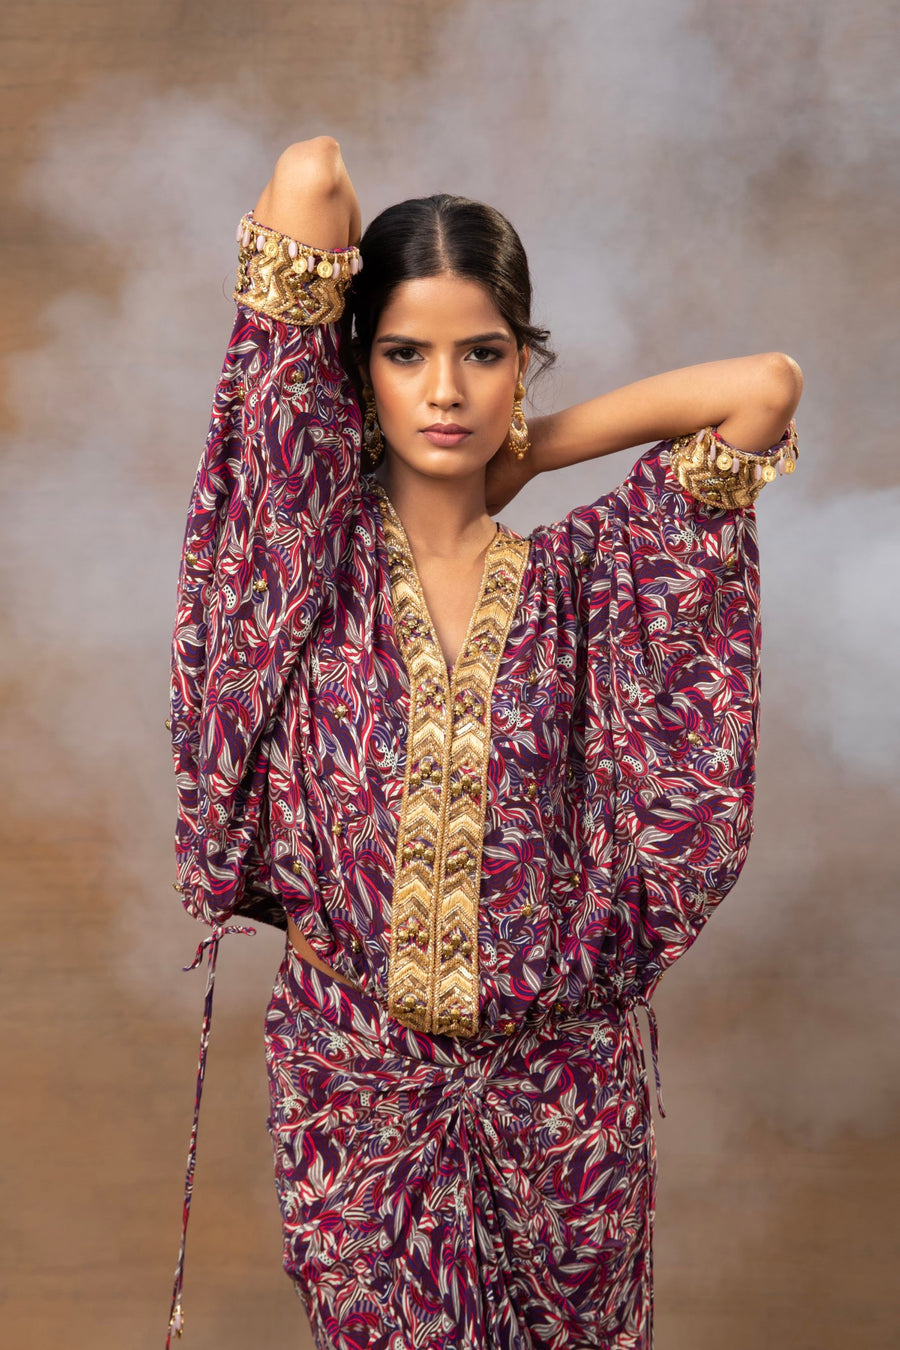 Purple Printed Embroidered Batwing Top With Draped Skirt Set